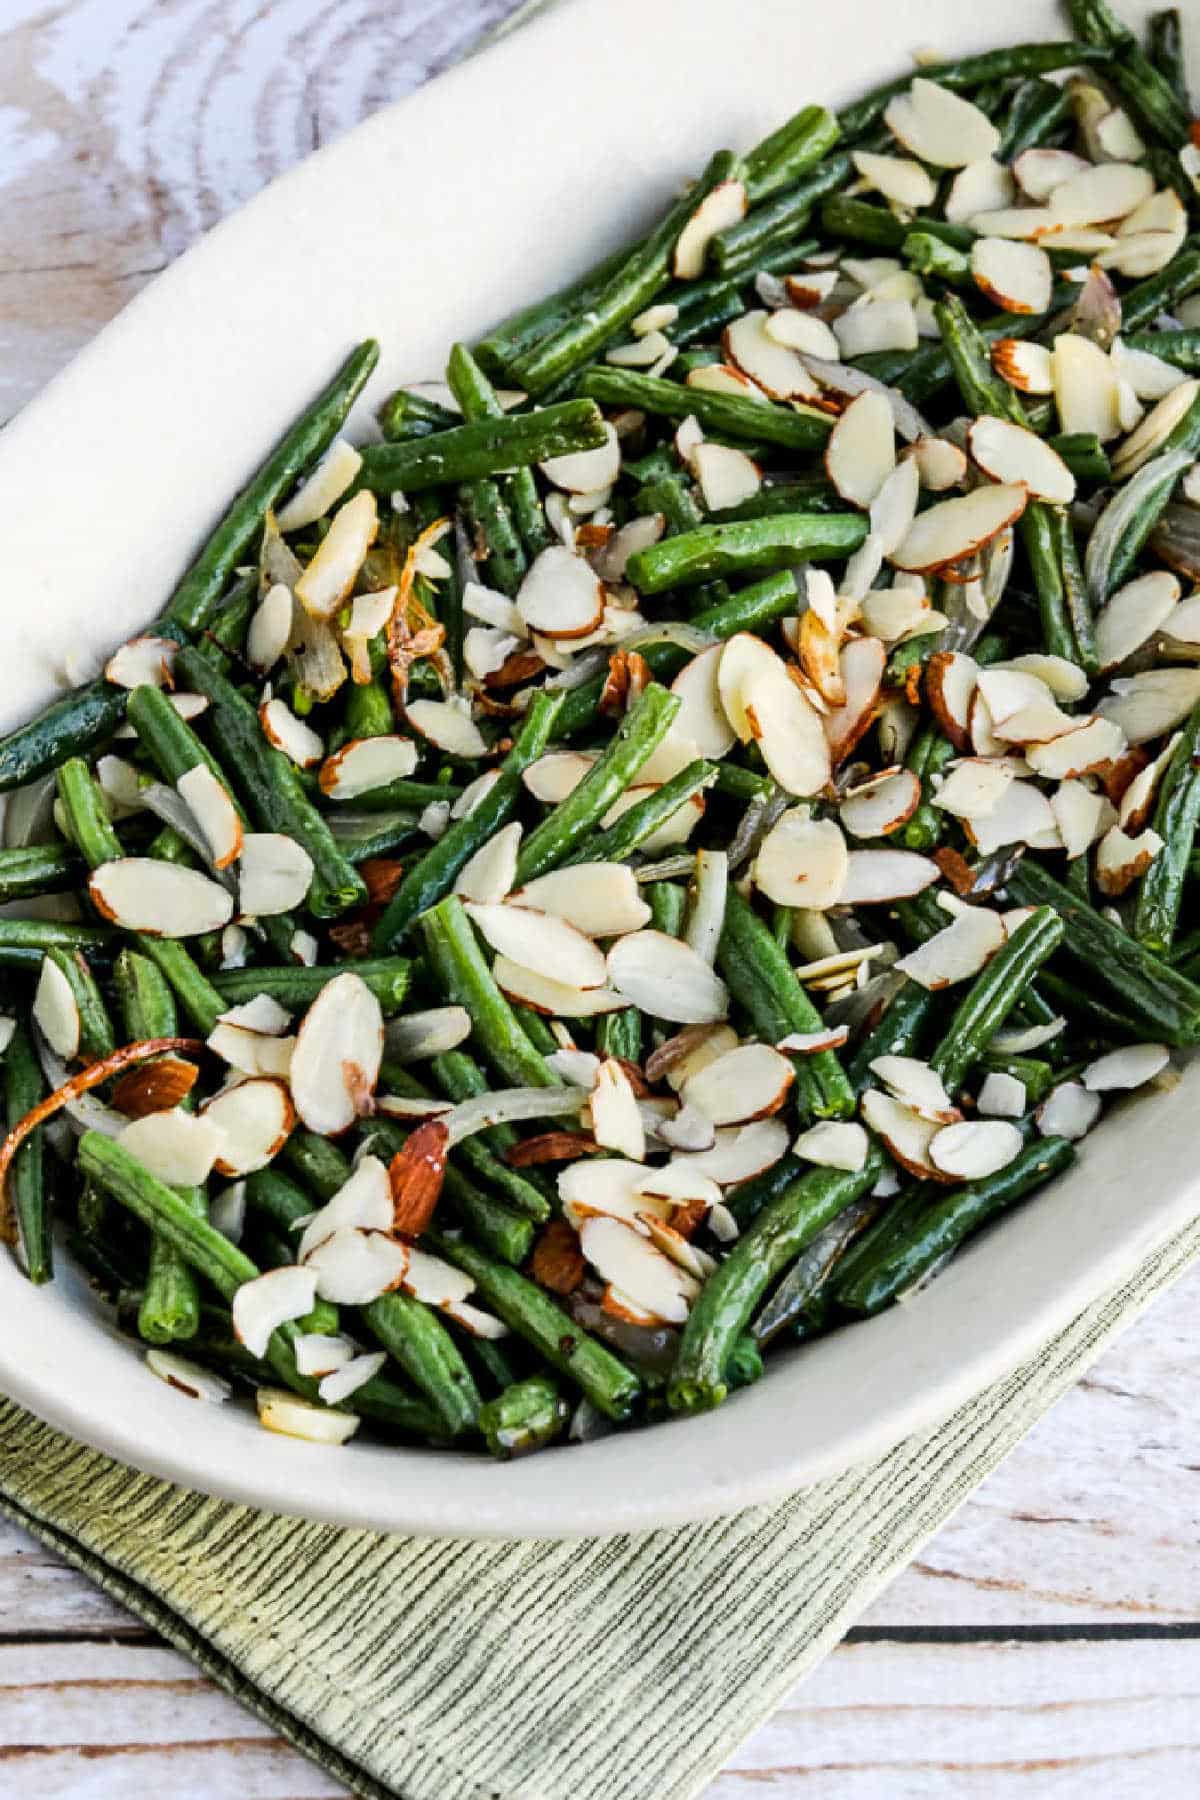 Garlic-Roasted Green Beans with Shallots and Almonds shown on serving platter